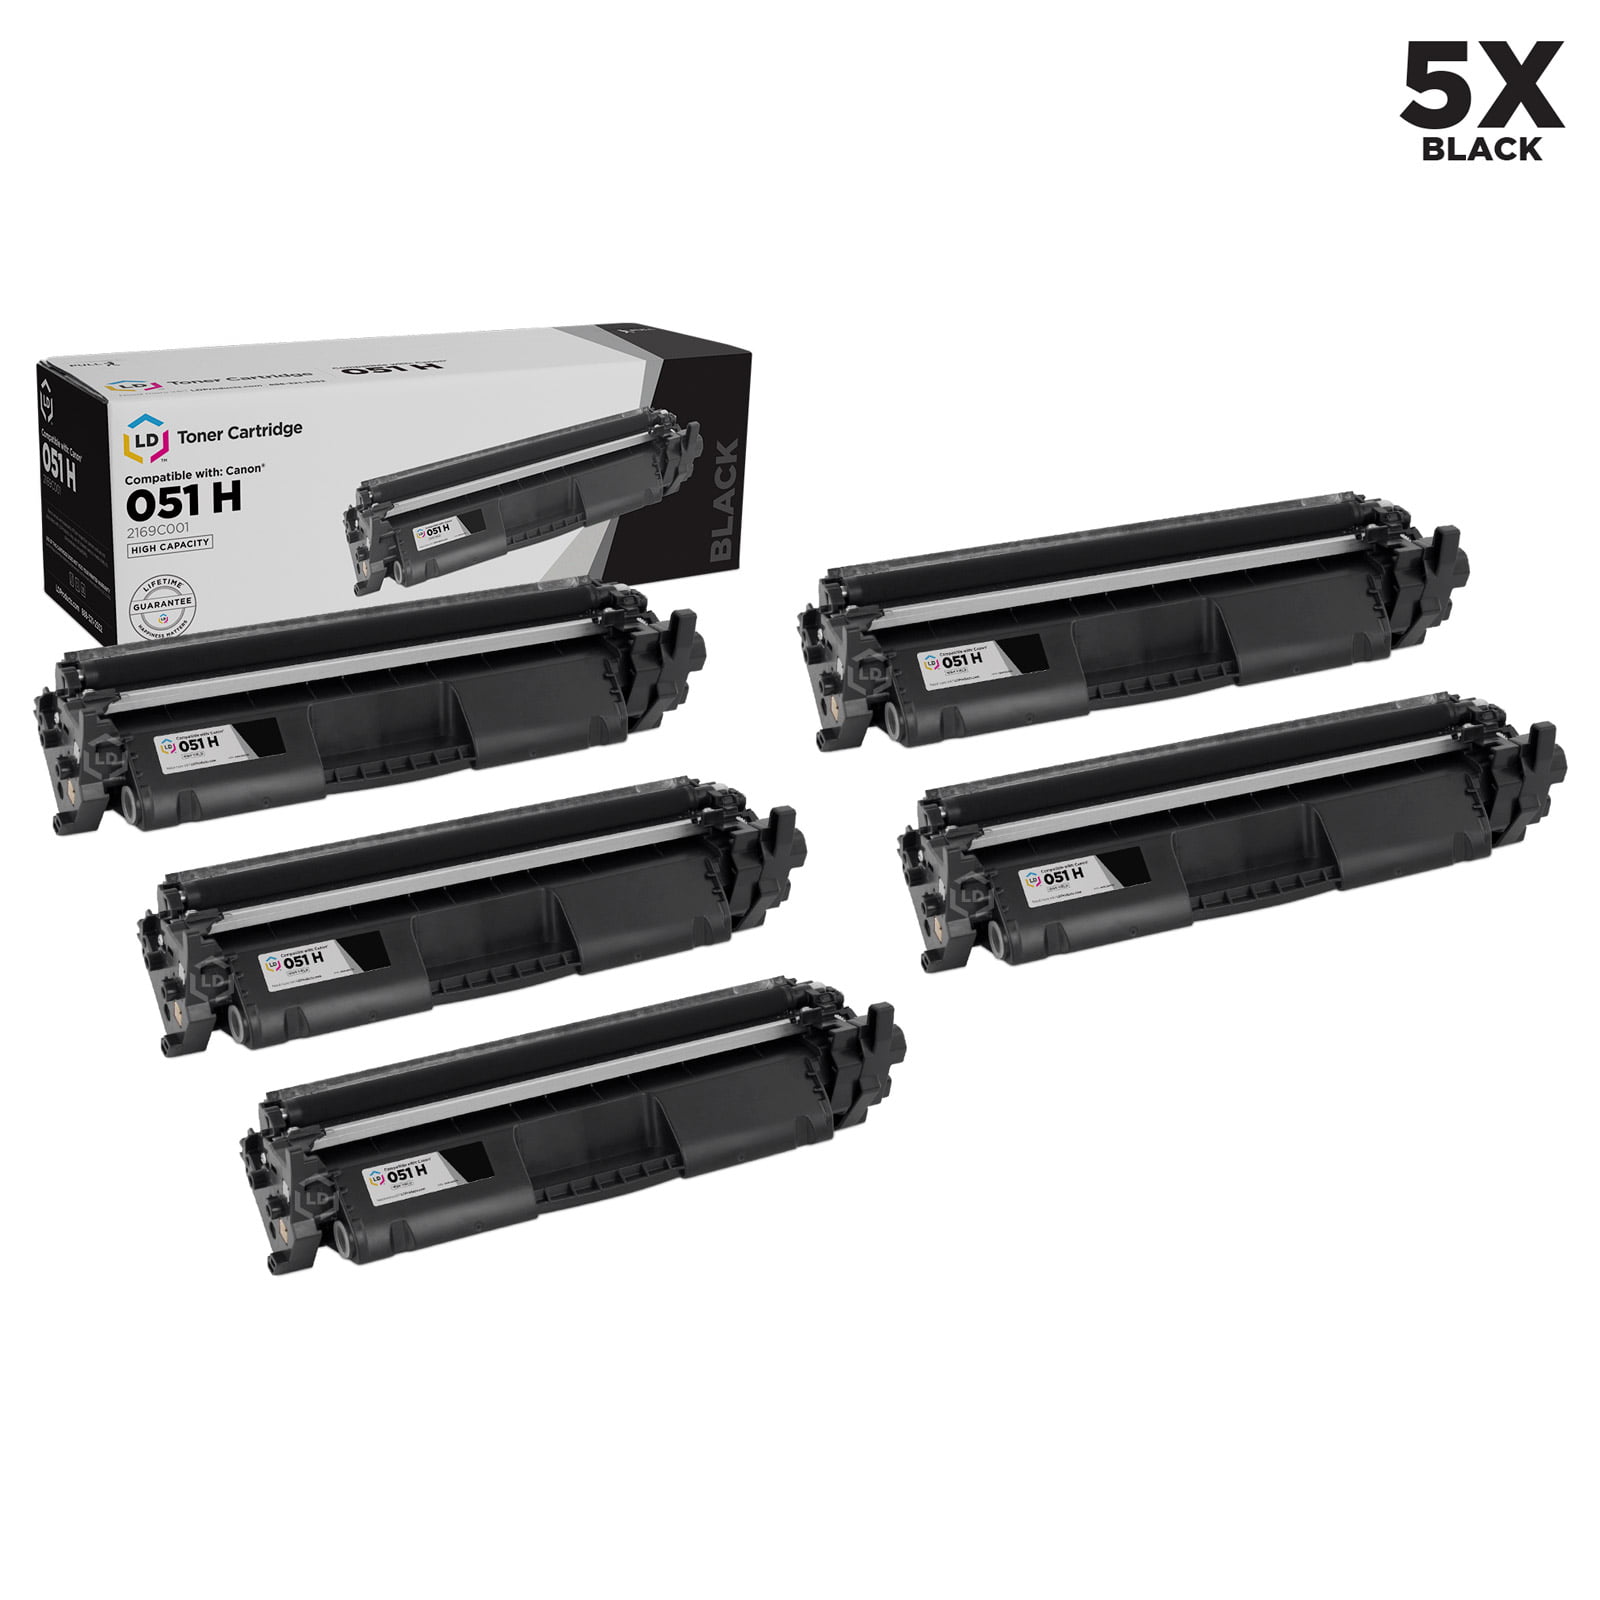 Black, 2-Pack LD Compatible Toner Cartridge Replacement for Canon 051H 2169C001 High Capacity